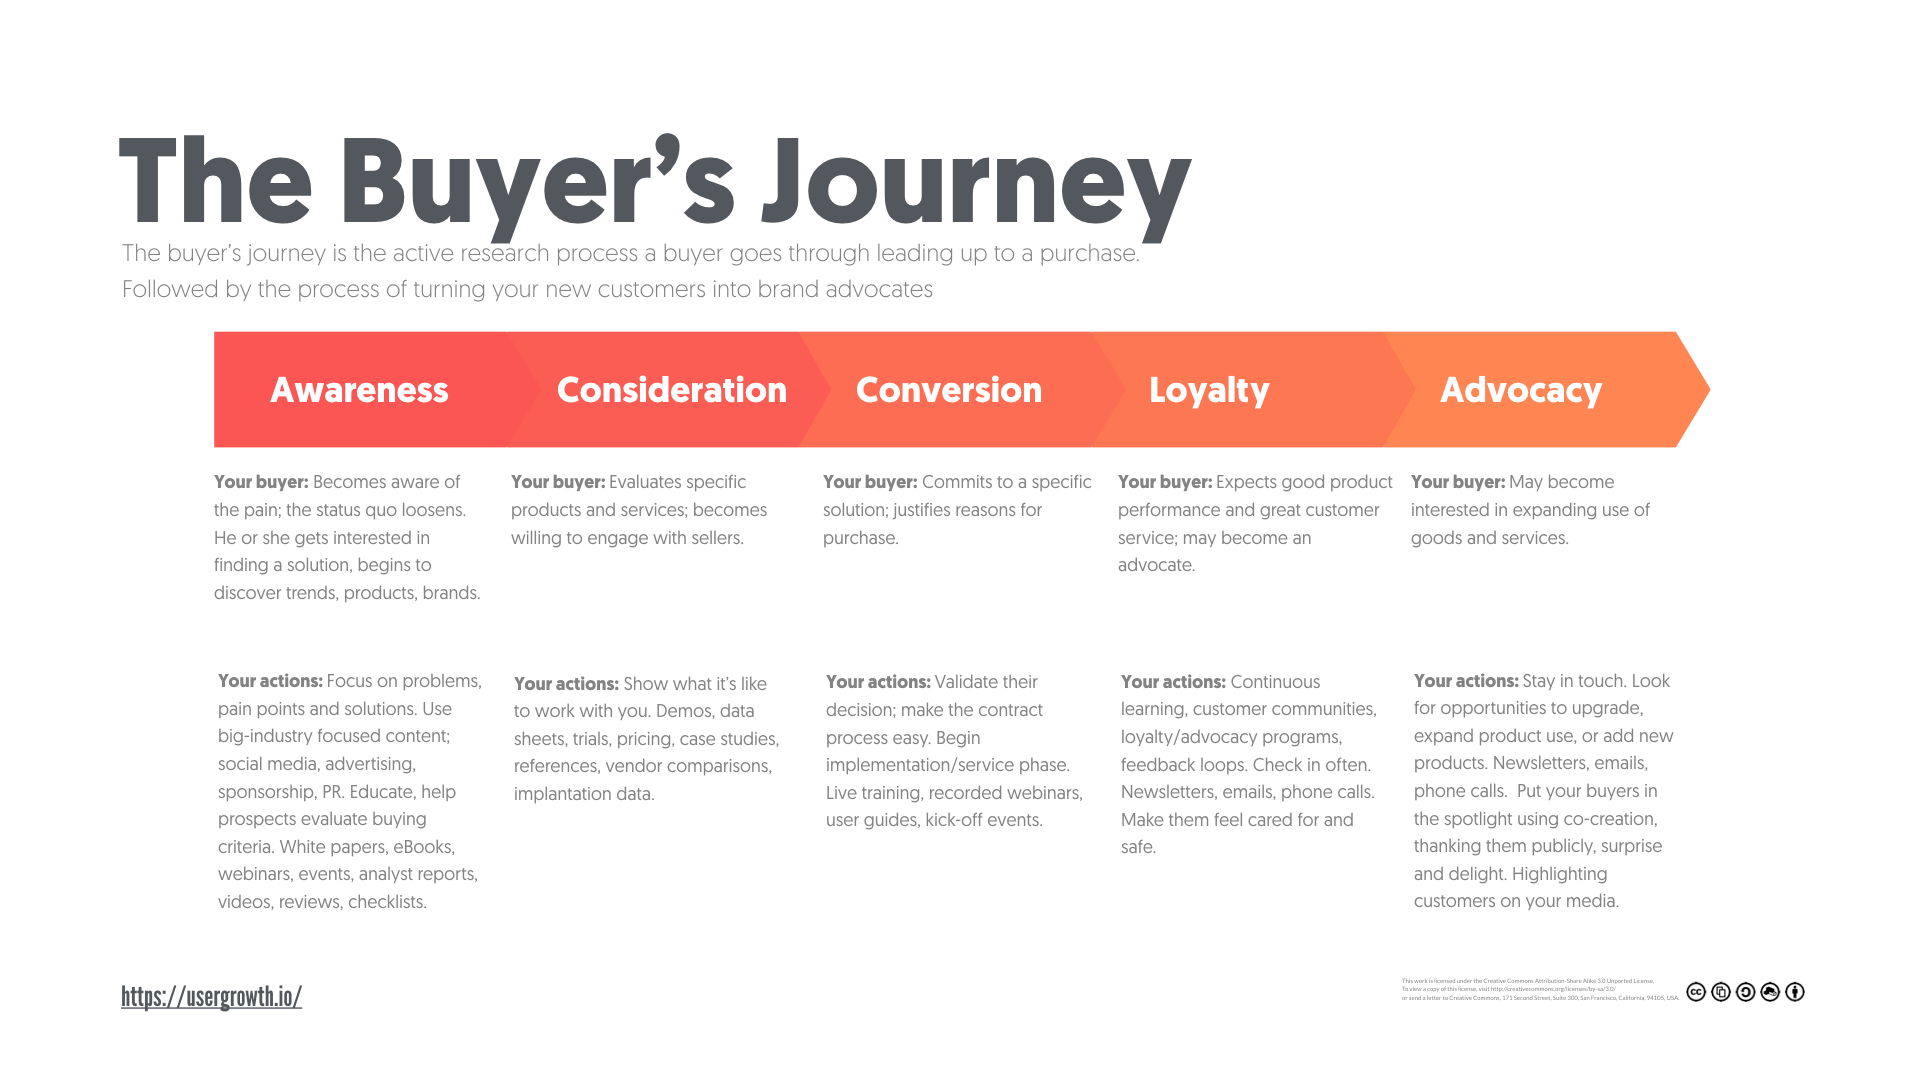 Different Content For Different Stages Of The Buyer's Journey